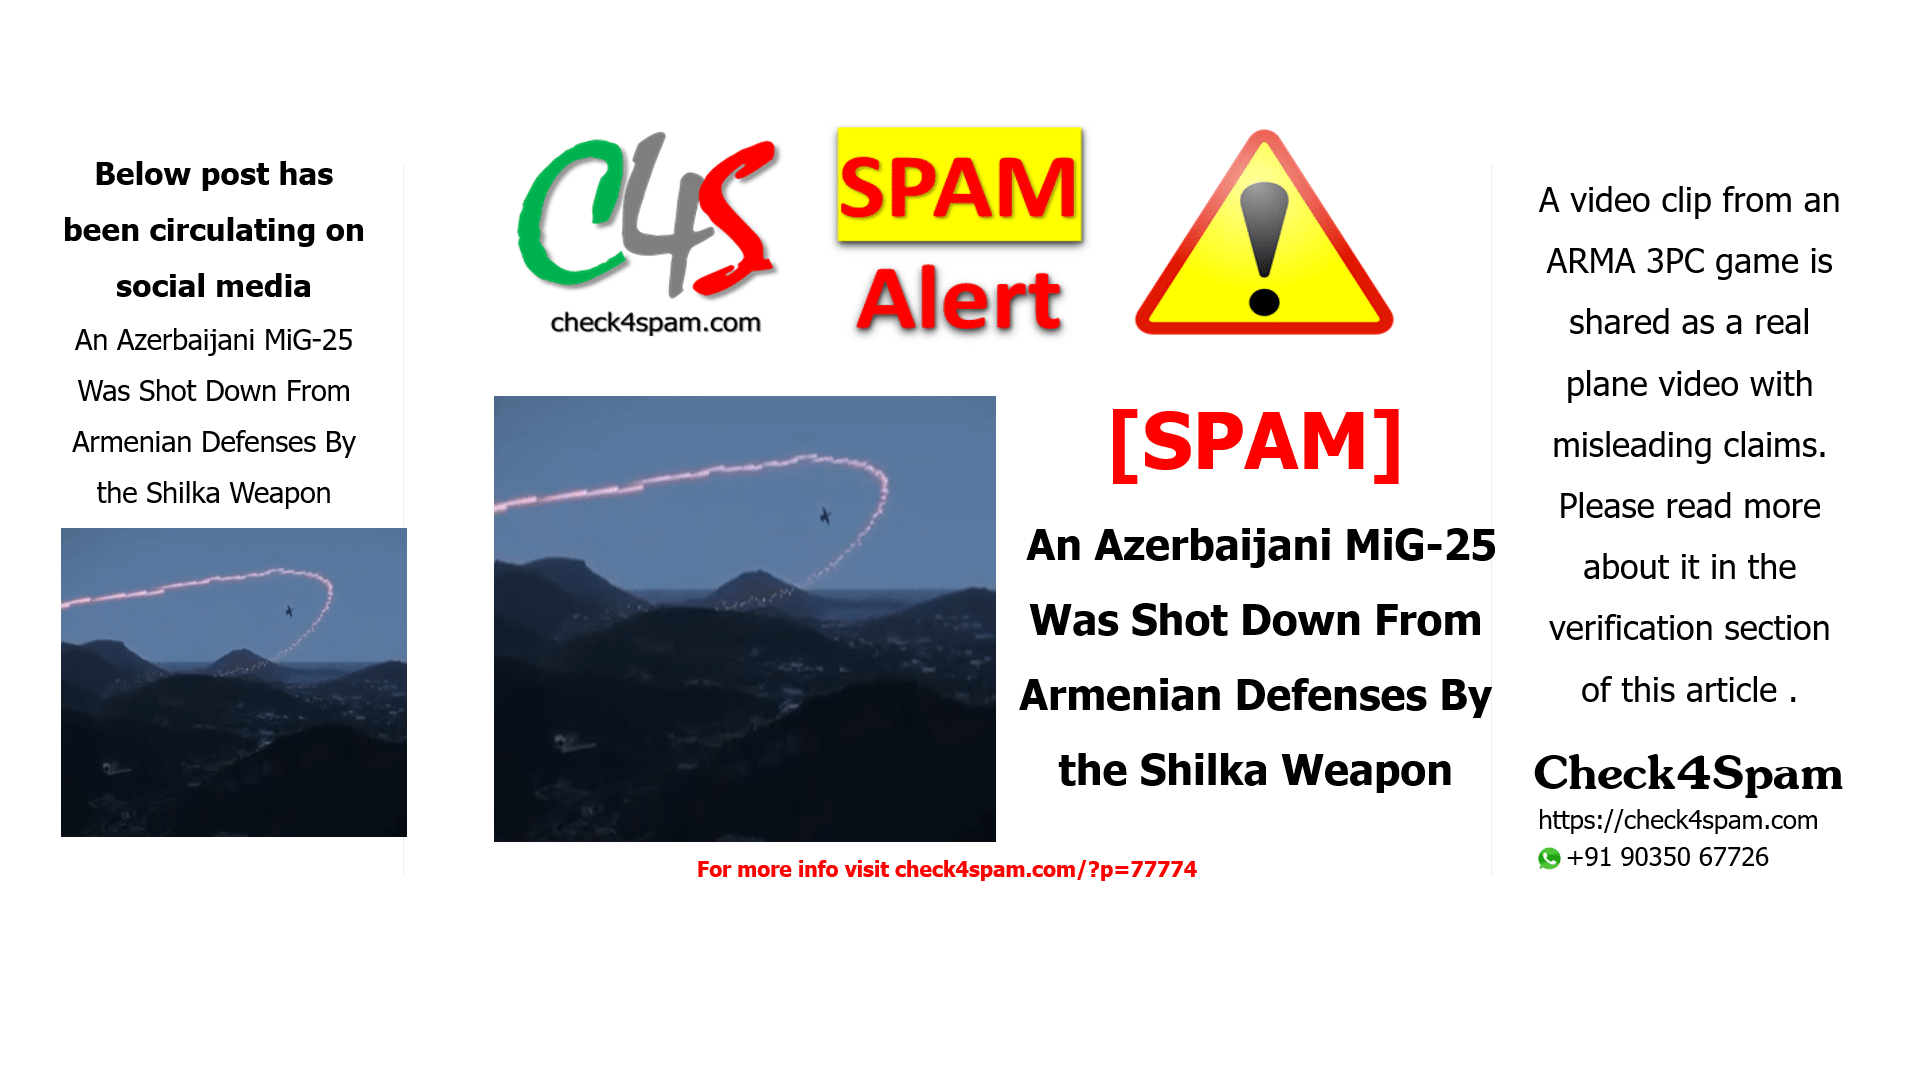 An Azerbaijani MiG-25 Was Shot Down From Armenian Defenses By the Shilka Weapon